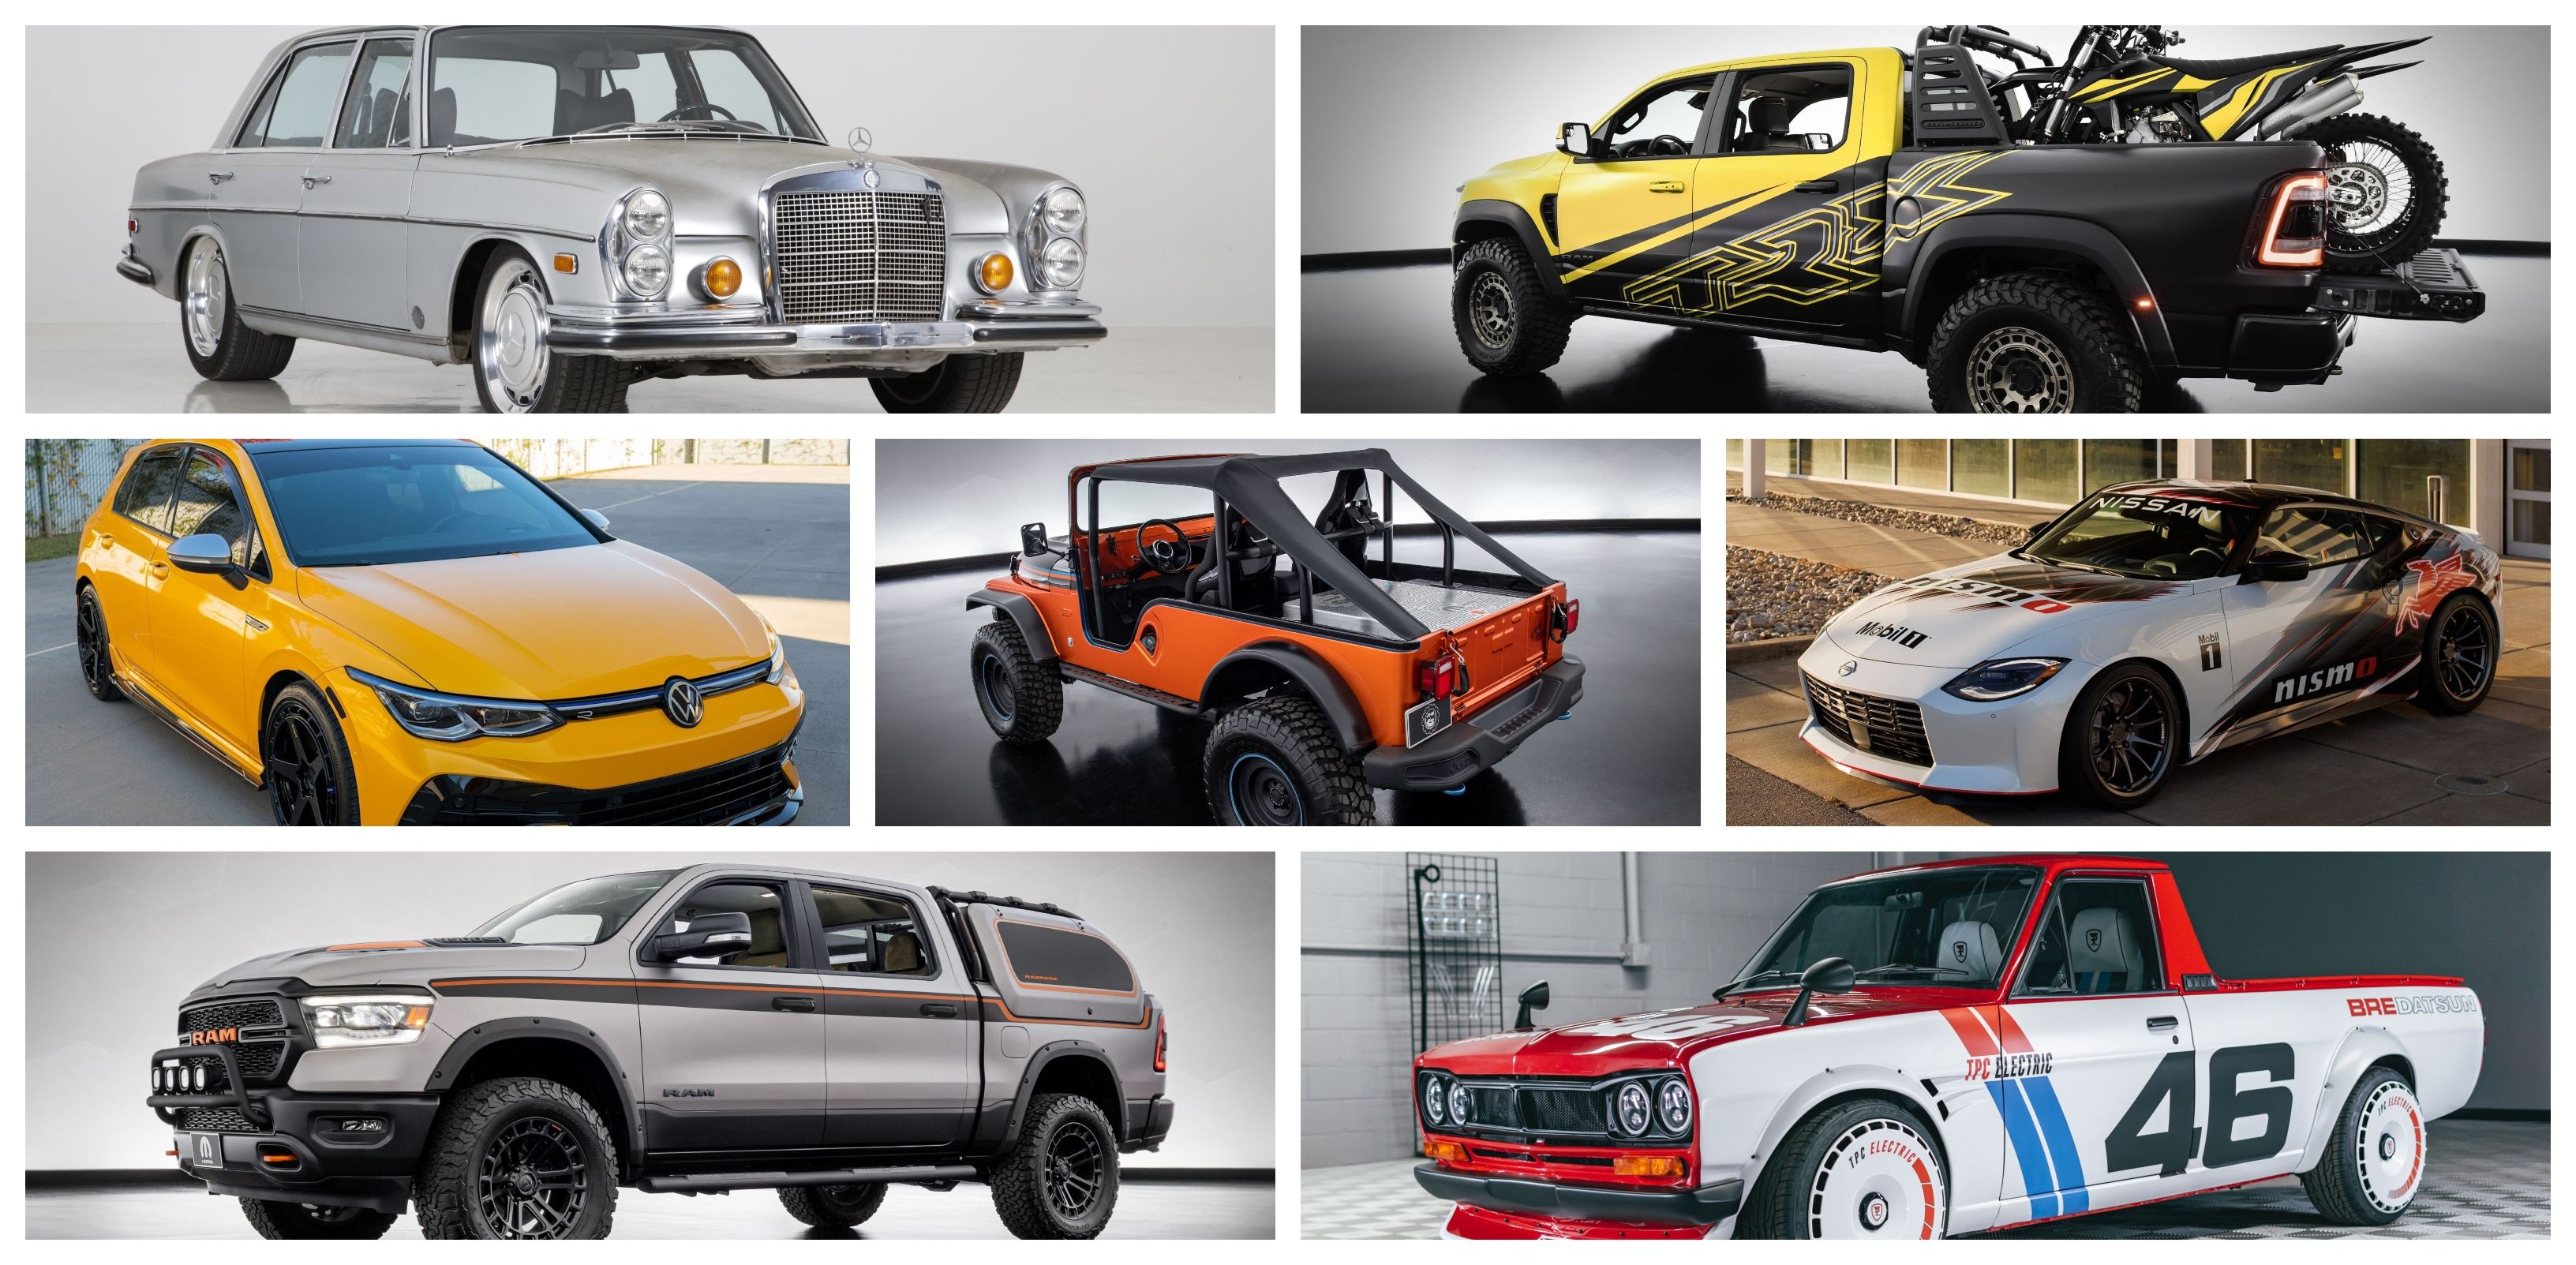 Caminofication: The Coolest Car-Trucks of All Time